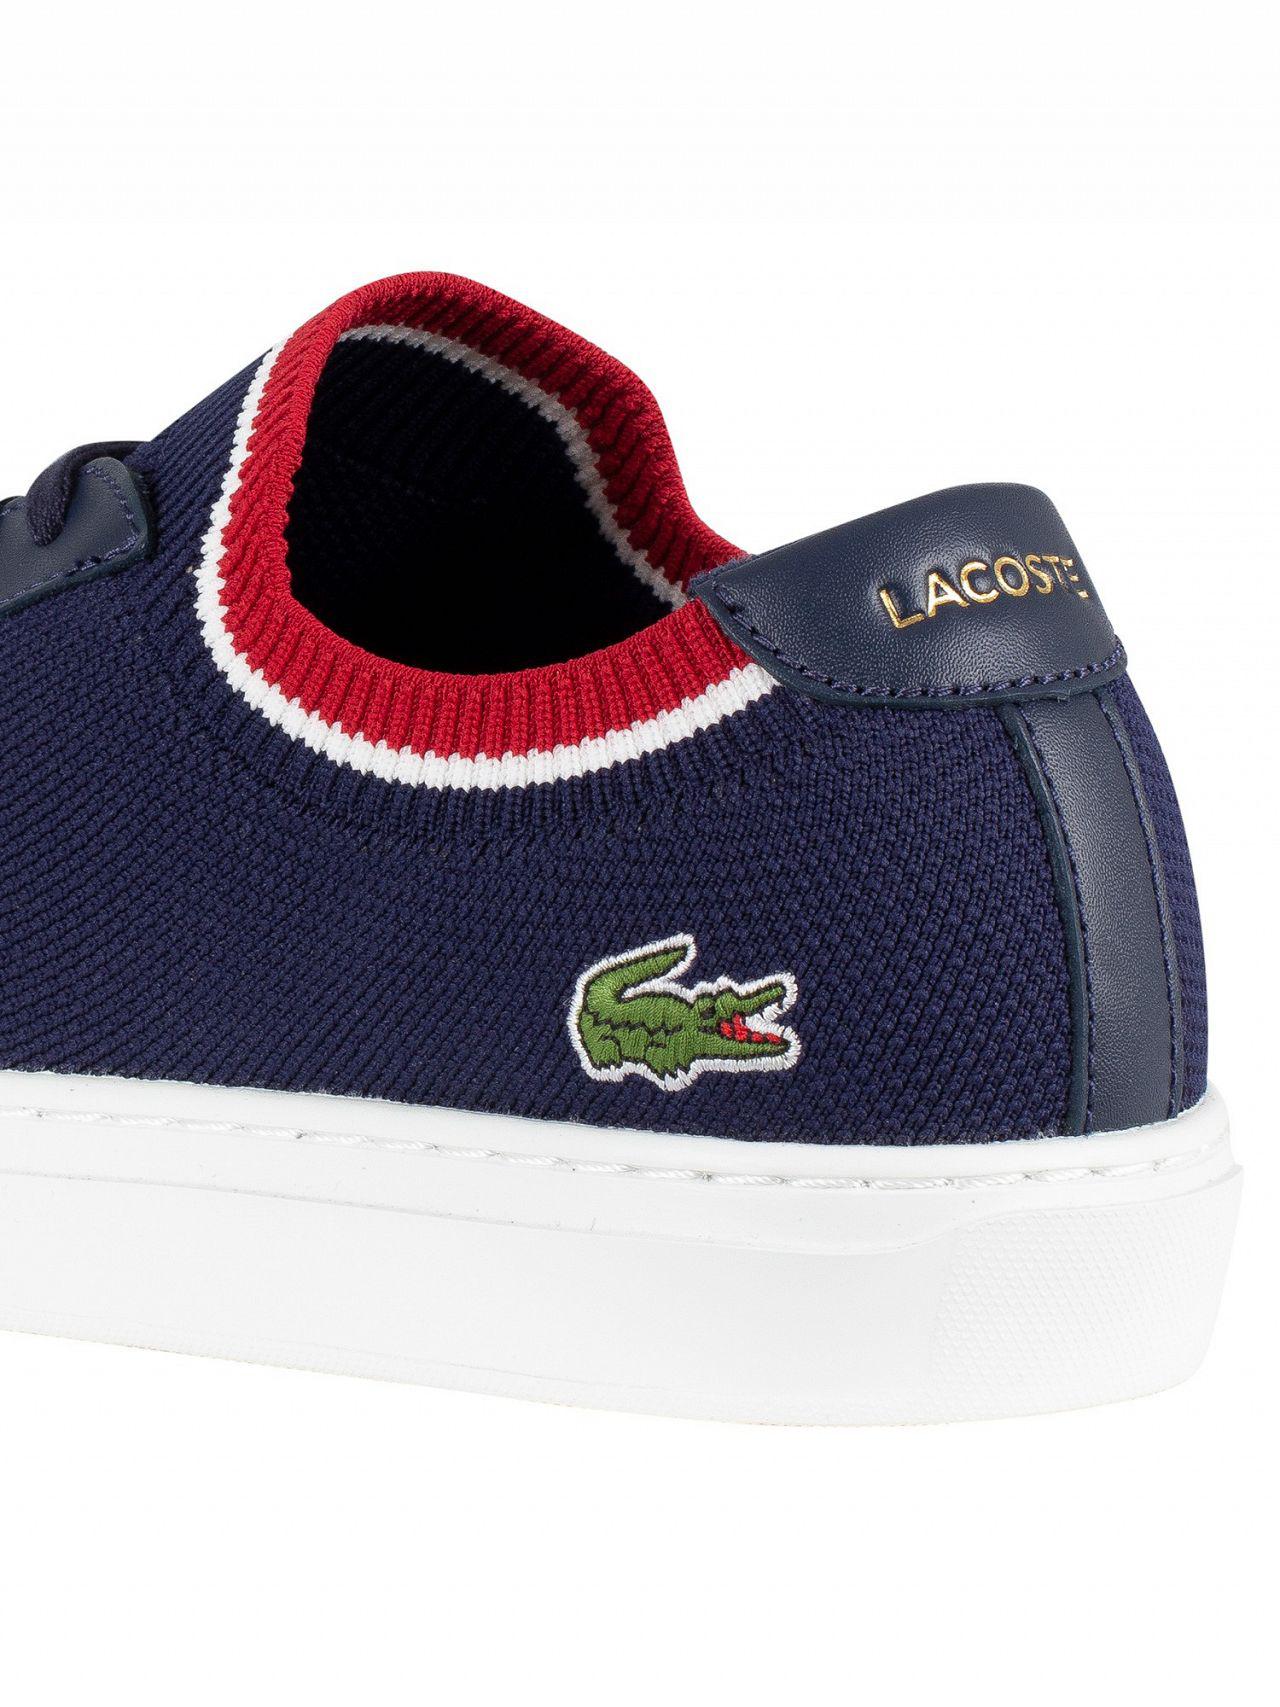 Lacoste Lace Navy/white/red La Piquee 119 1 Cma Trainers in Blue for Men |  Lyst